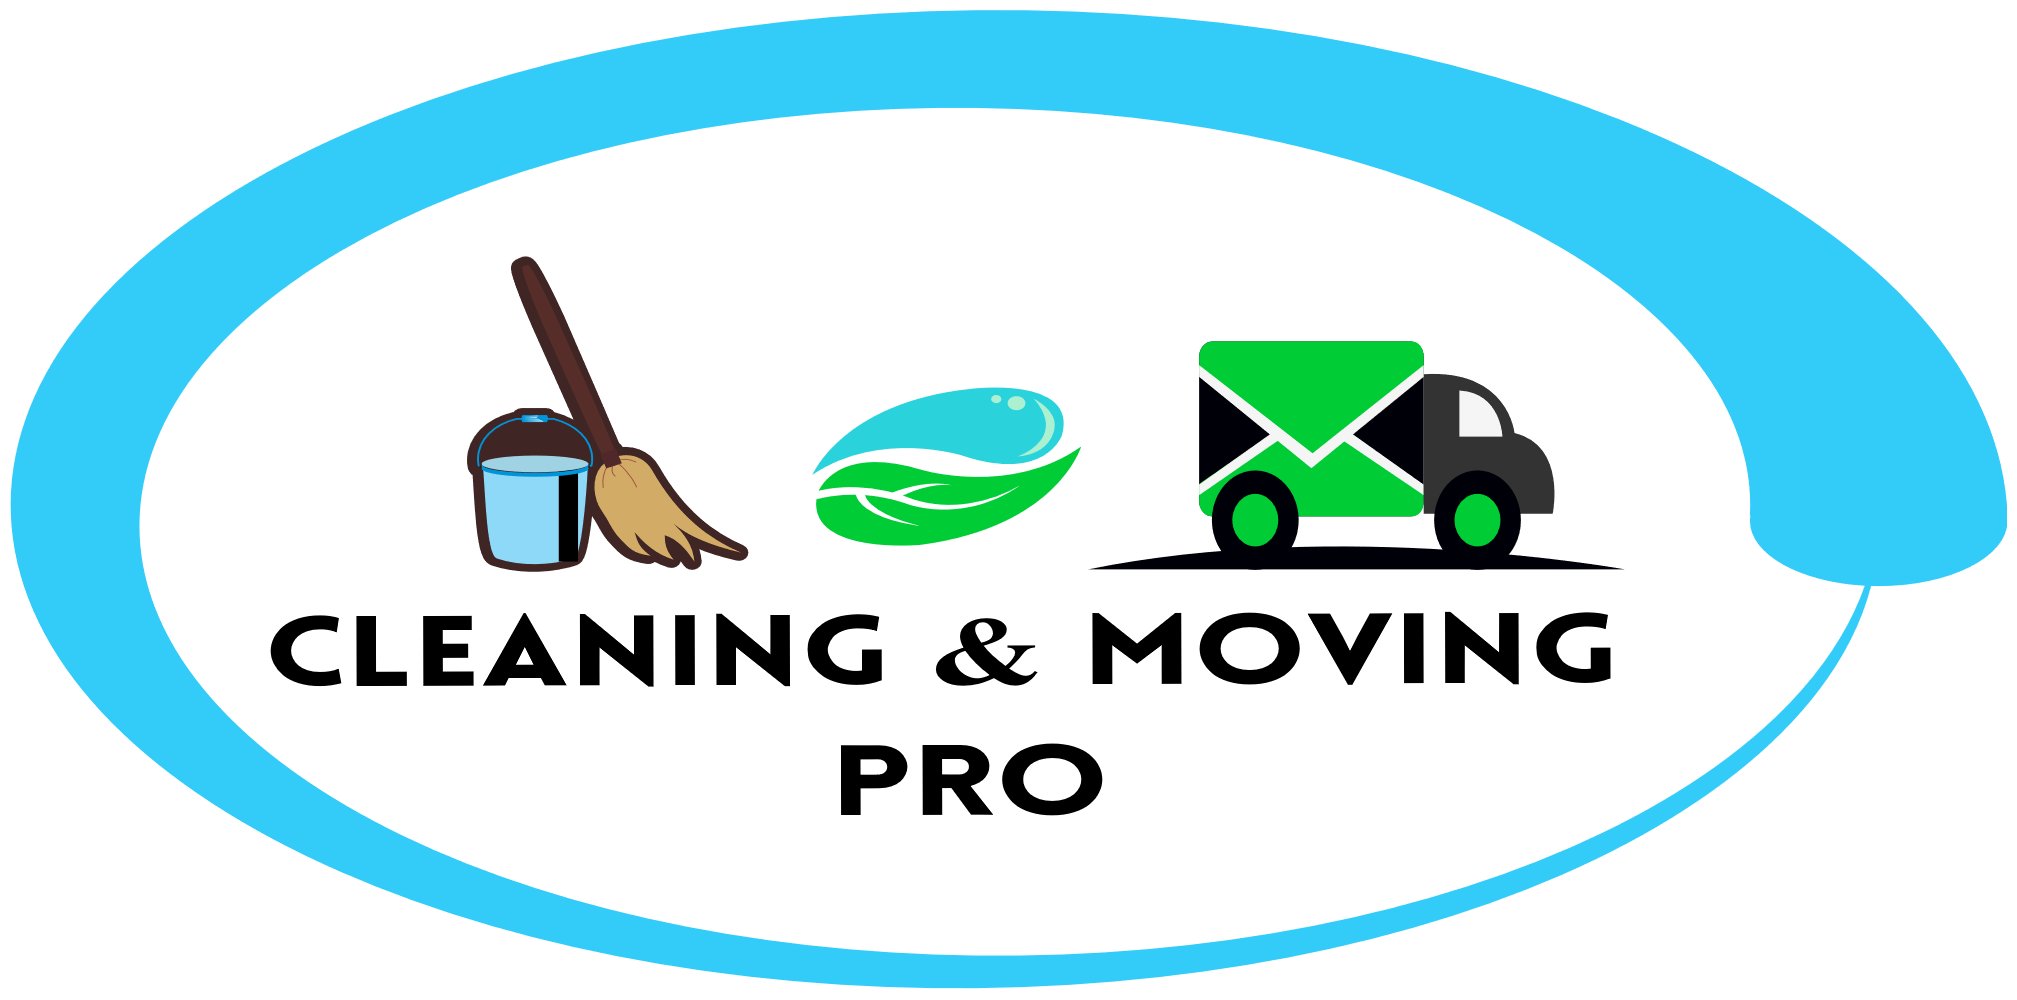 Top-Rated Cleaning Services in Ireland | Award-Winning, Eco-Friendly & Insured - Cleaning And Moving Pro.-CLEANING AND MOVING PRO